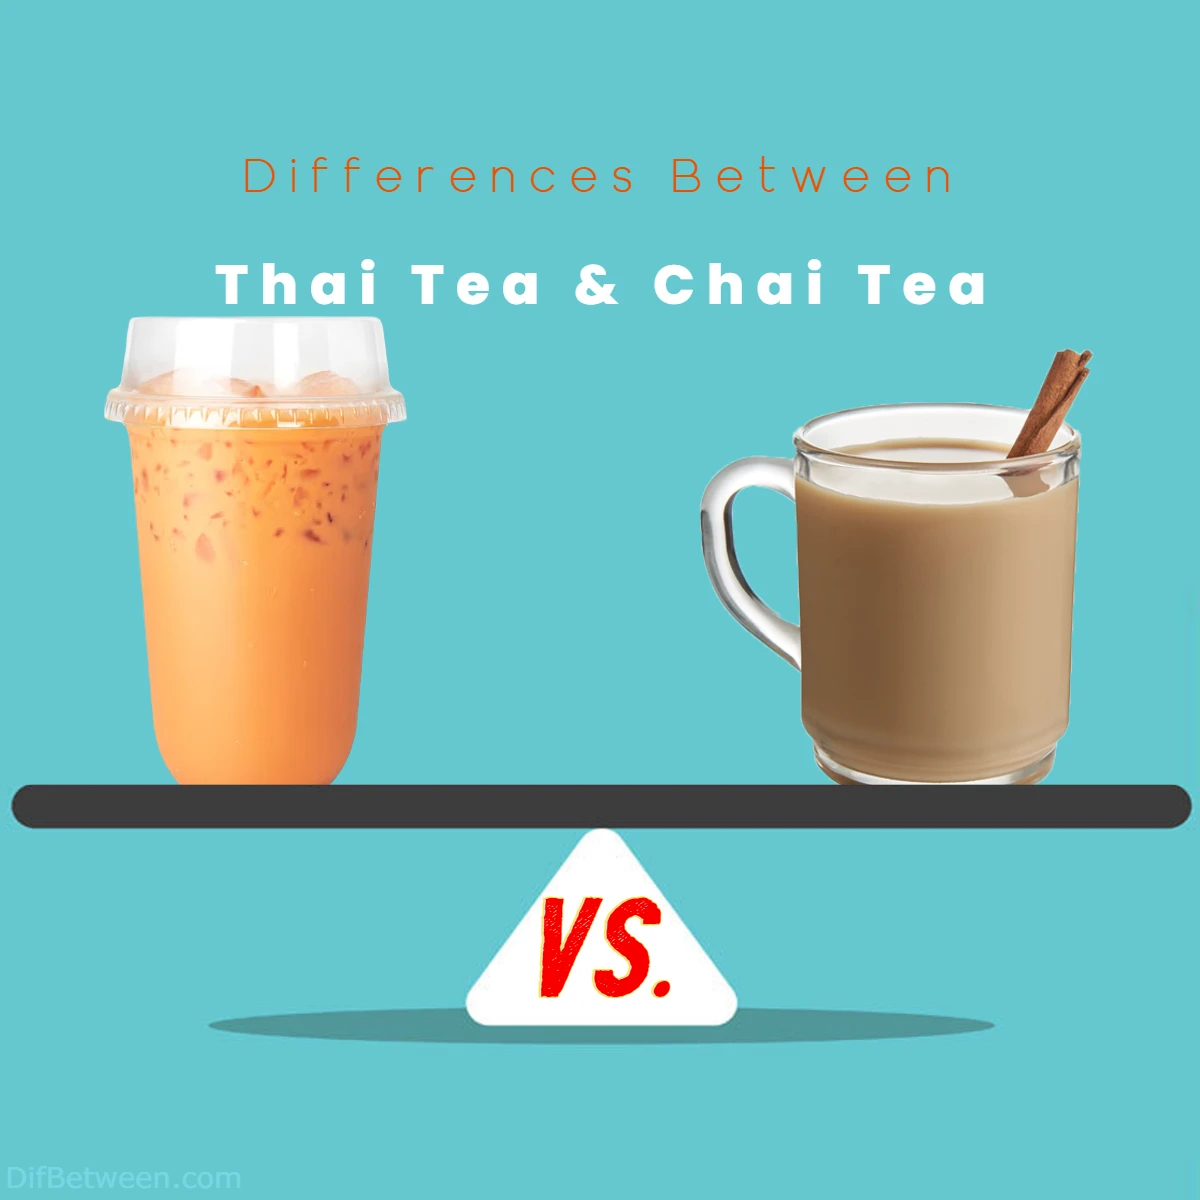 Differences Between Chai Tea and Thai Tea